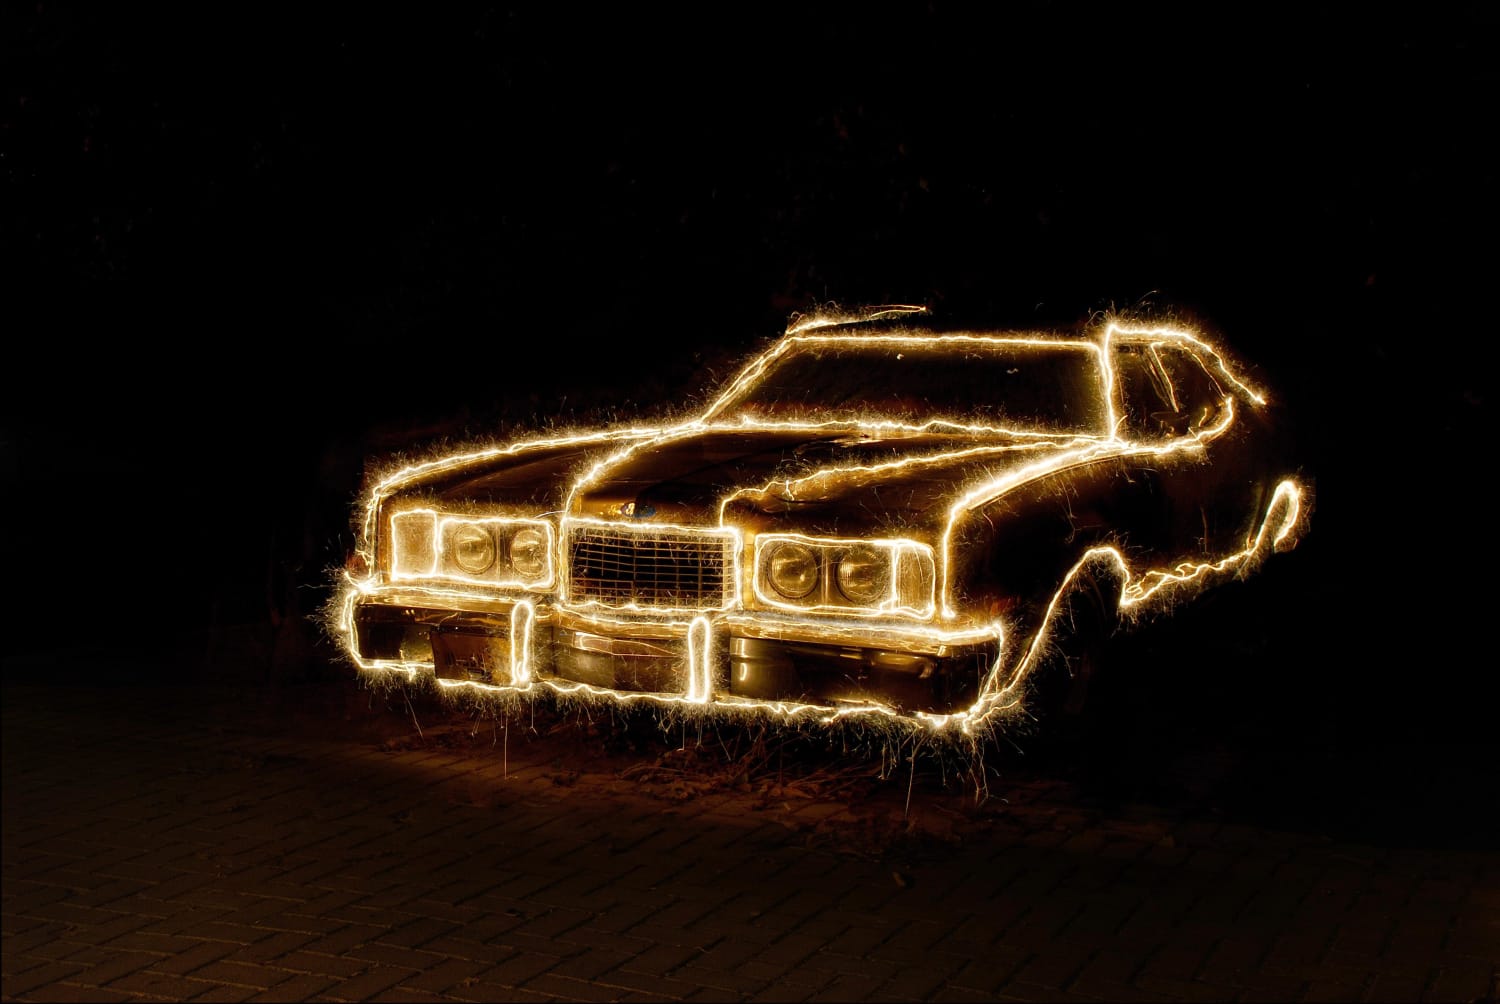 Mercury Montego and some sparklers